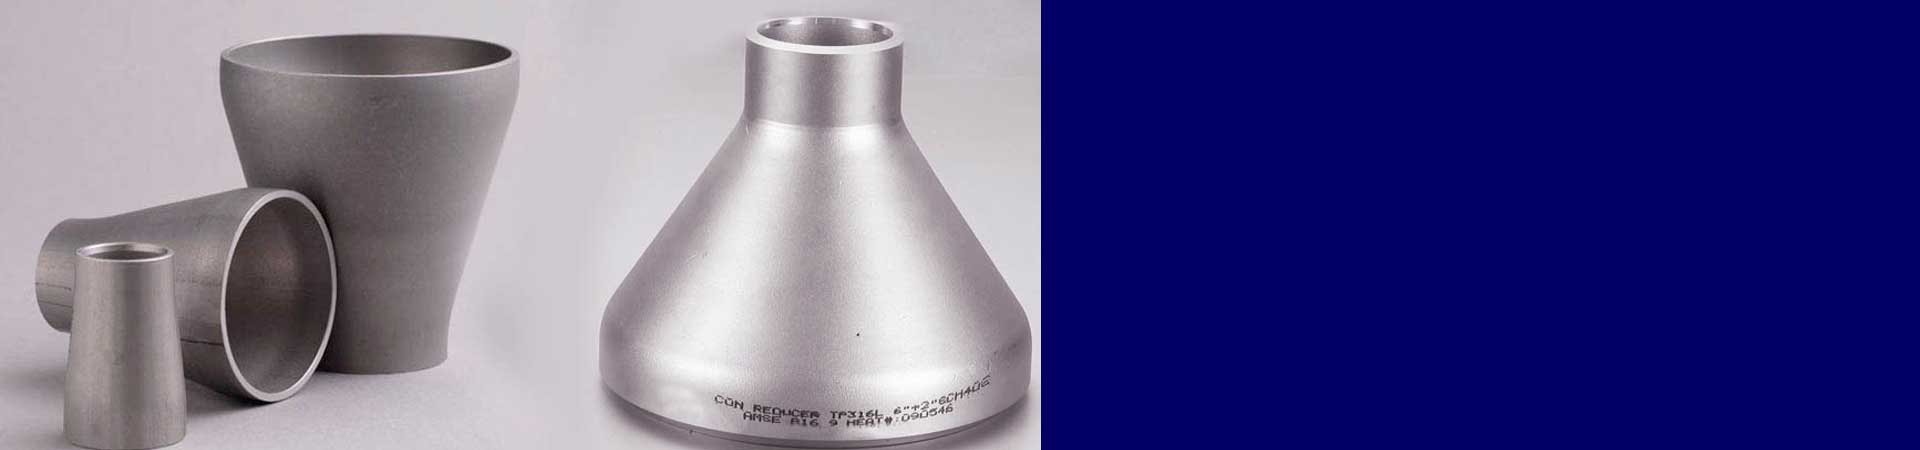 Stainless Steel fittings manufacturer in india